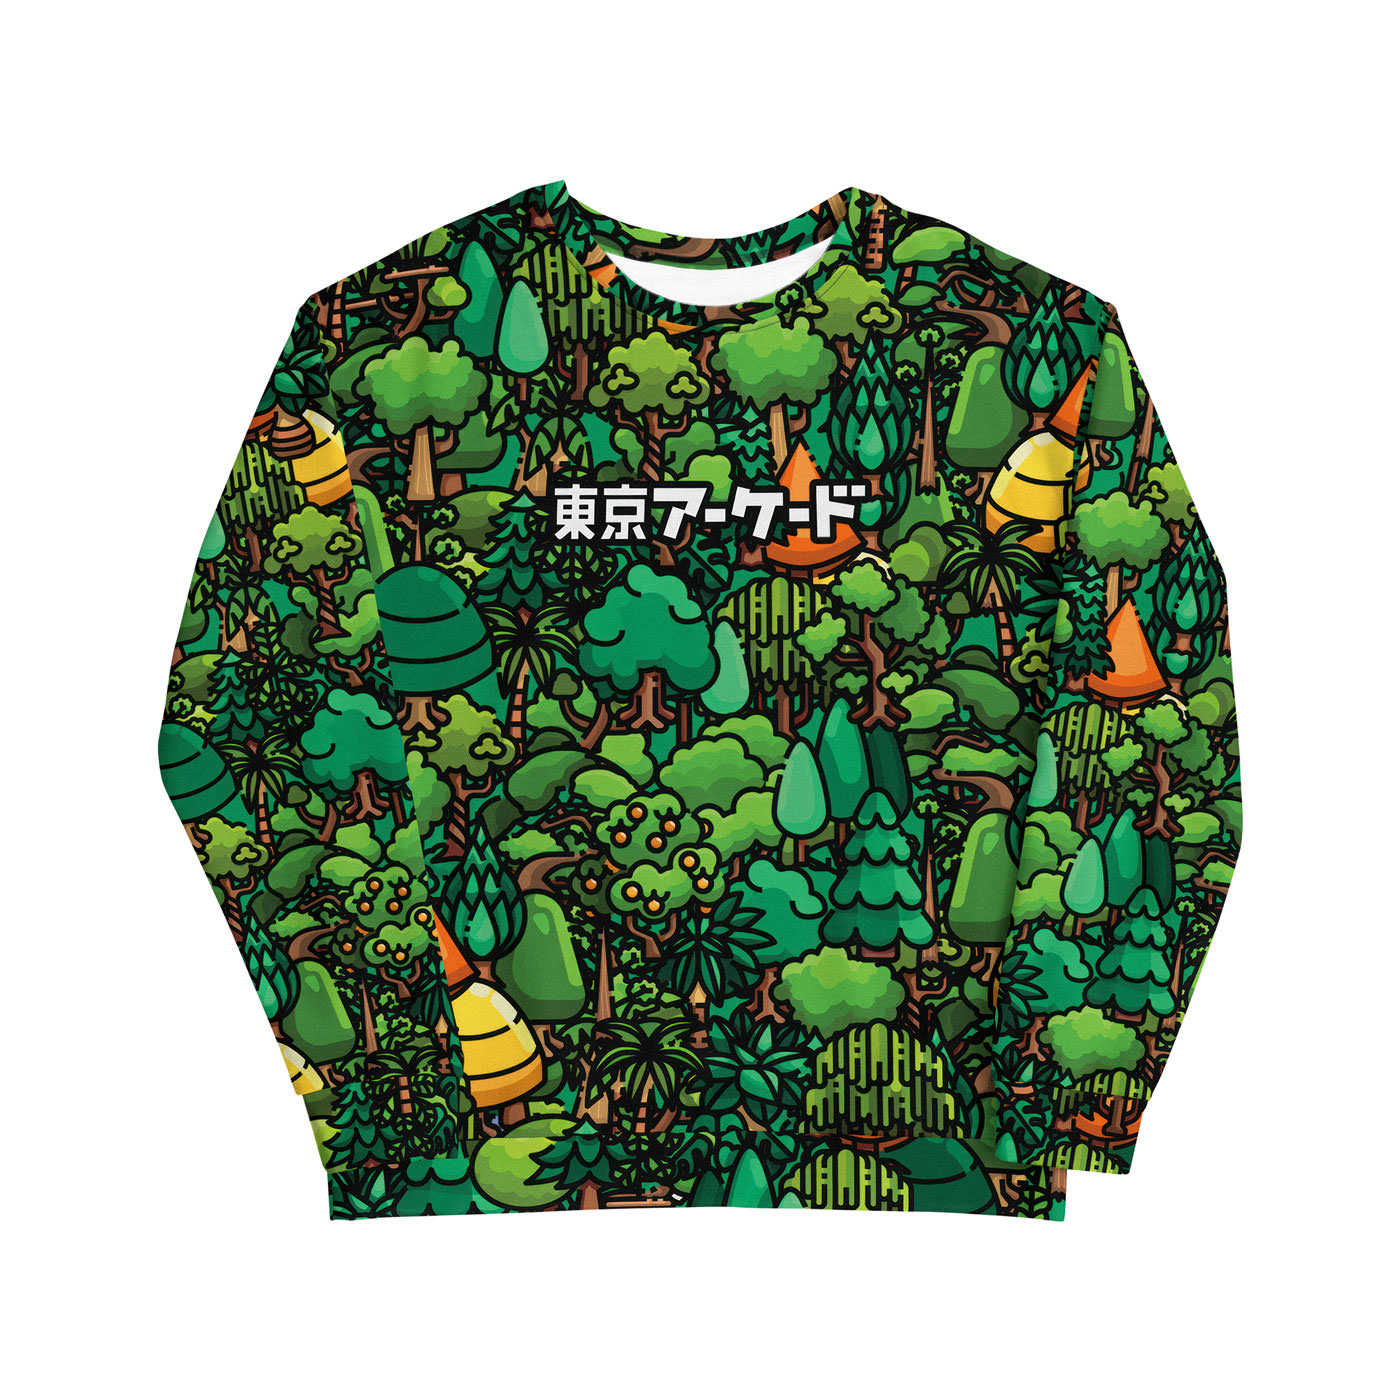 🗼🇯🇵 Sweater concept: Hinoki cypress, also called the Japanese cypress, is native to central areas of Japan. It is slow-growing but will eventually reach 115 feet tall. It has lovely red-brown bark and green leaves. The cones are about half an inch long 🎮🕹️👾